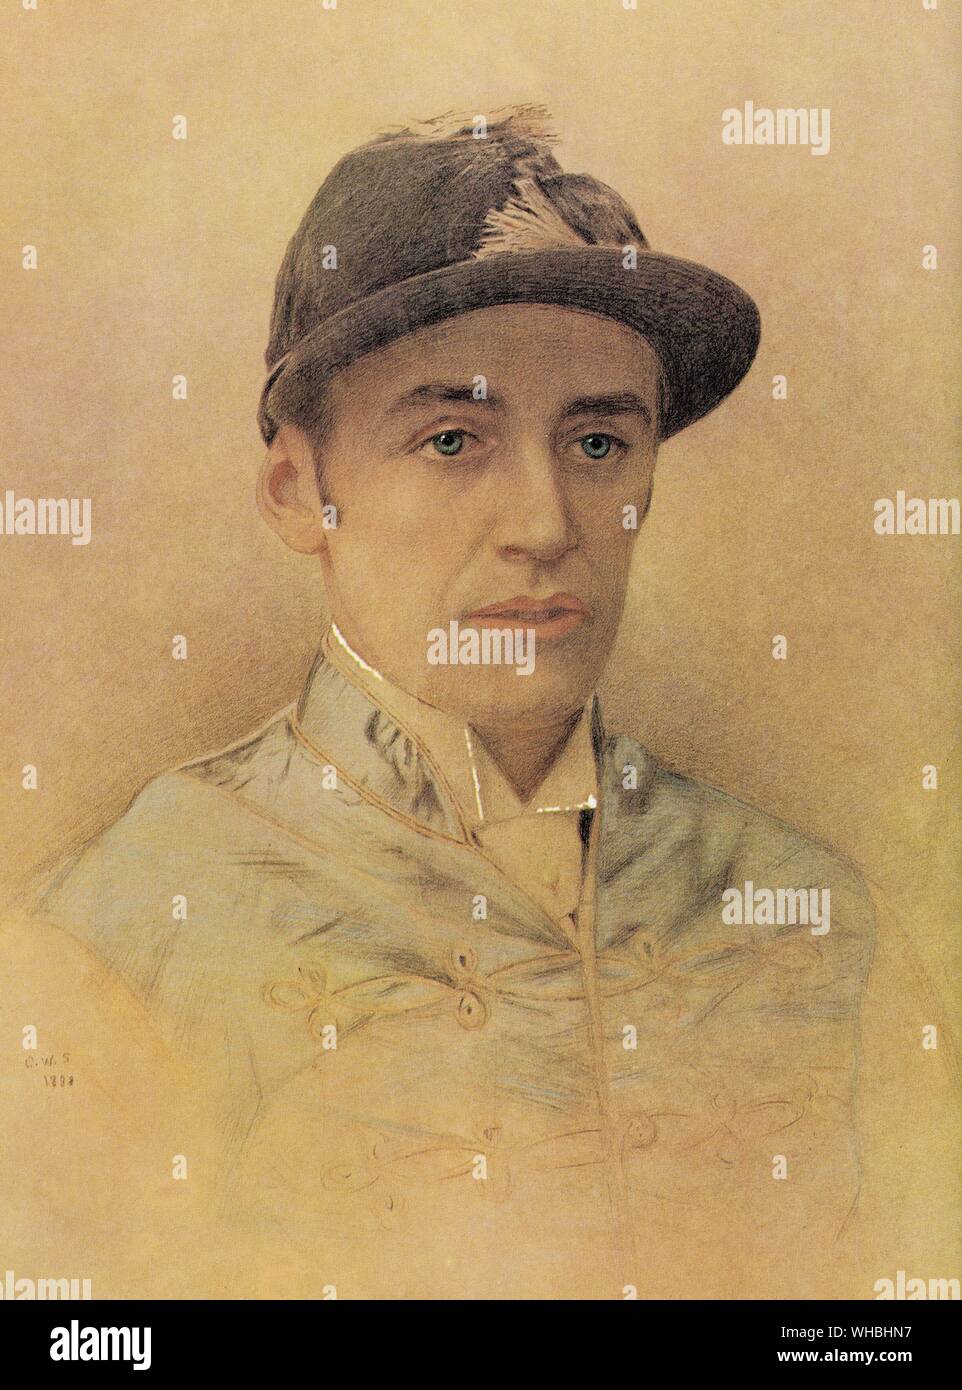 Frederick James Archer - The Tinman (1857 - 1886 ). He was the supreme flat race jockey of the 19th century , being champion jockey for 13 consecutive years from 1874 to 1886 . . This pastel portrait was done in 1883 Stock Photo